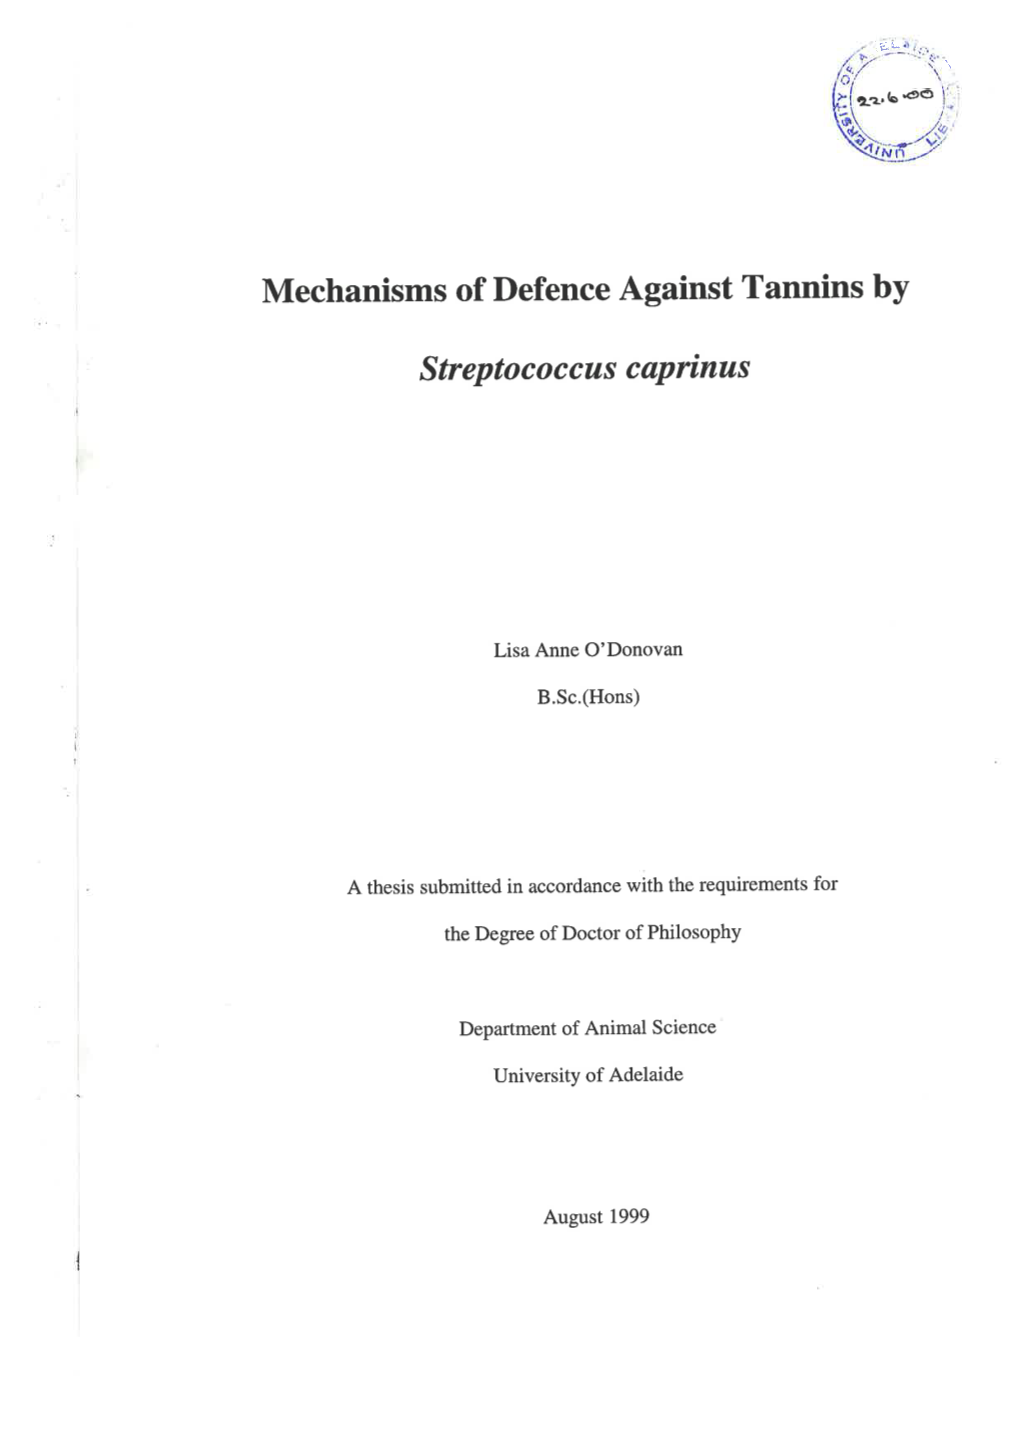 Mechanisms of Defence Against Tannins by Streptococcus Caprinus